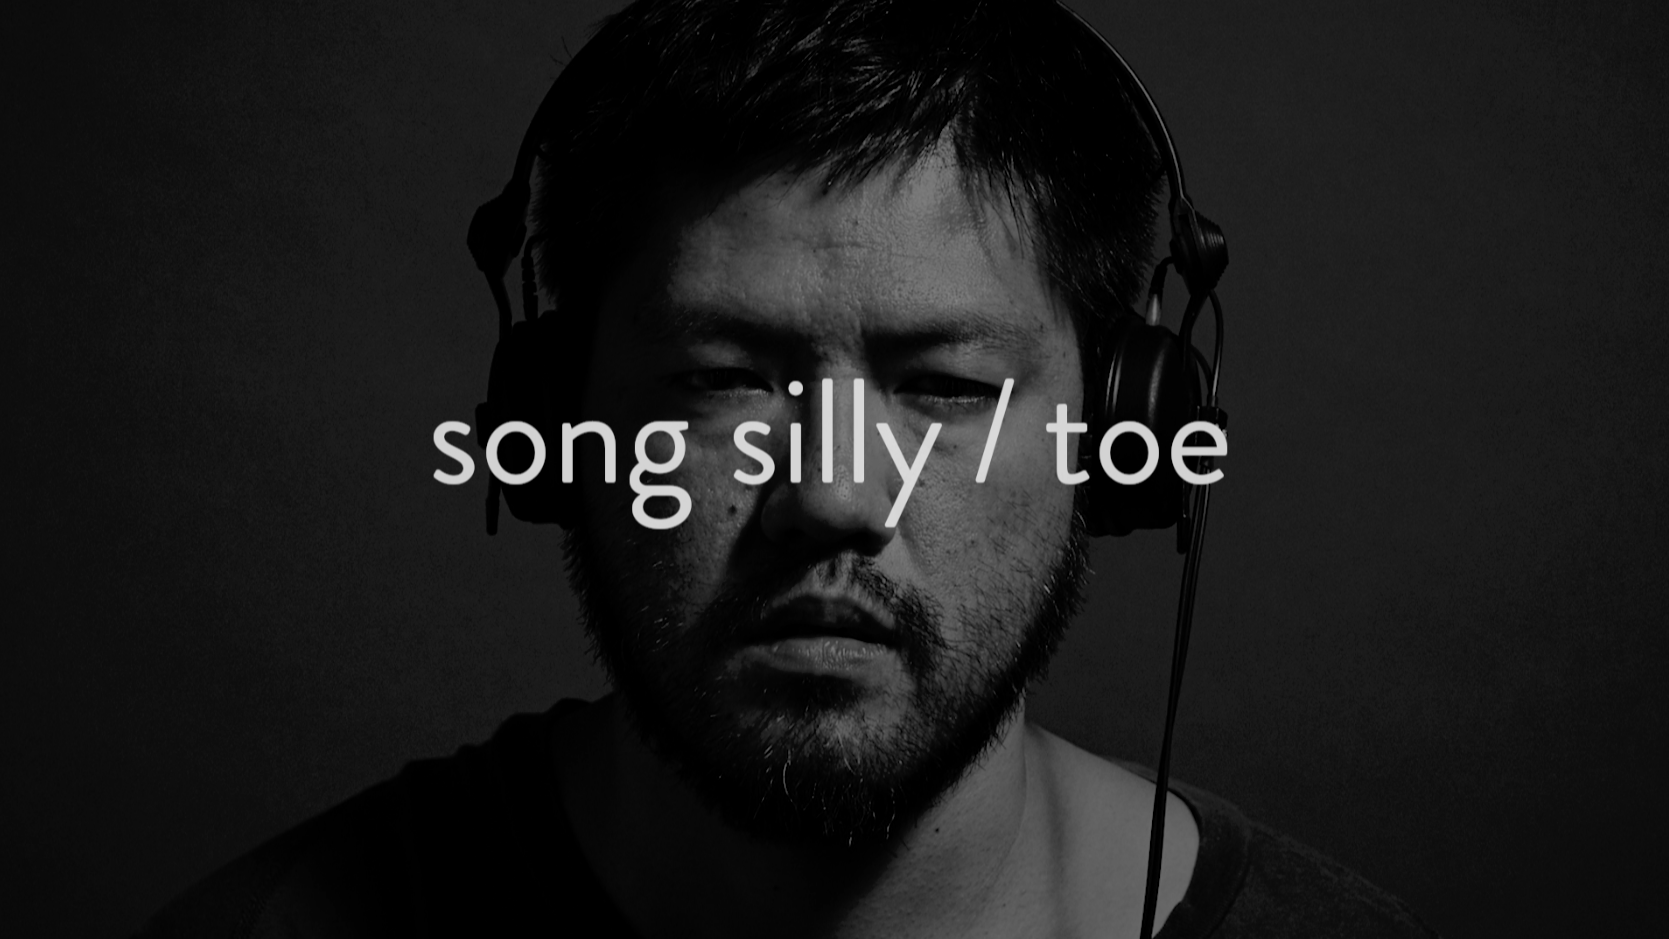 toe song silly